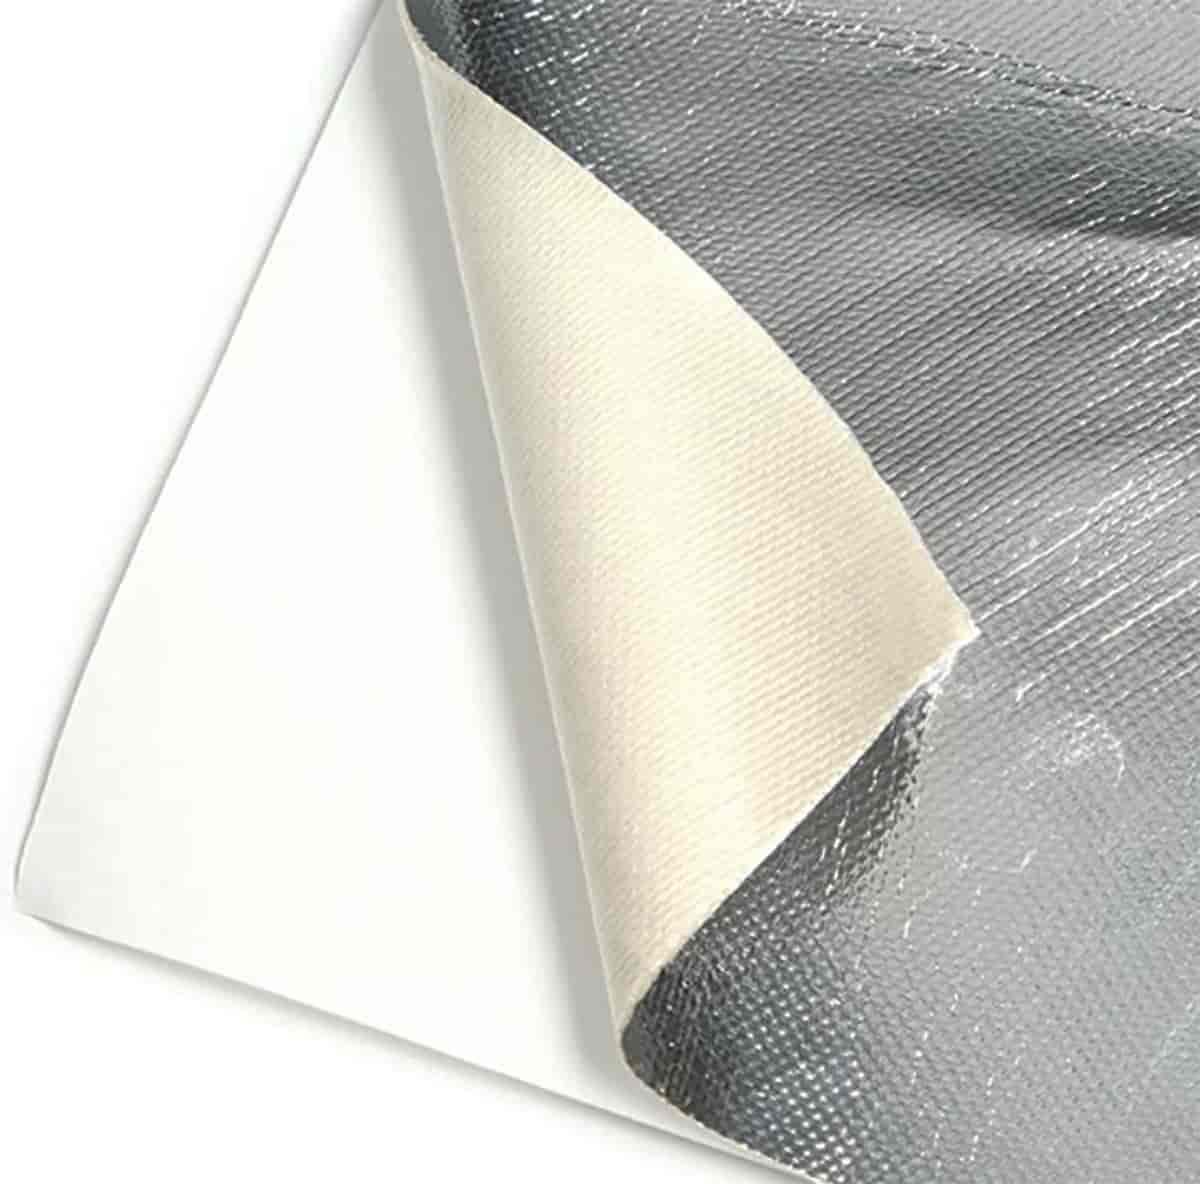 Aluminum Silica Mylar Heat Barrier with Adhesive